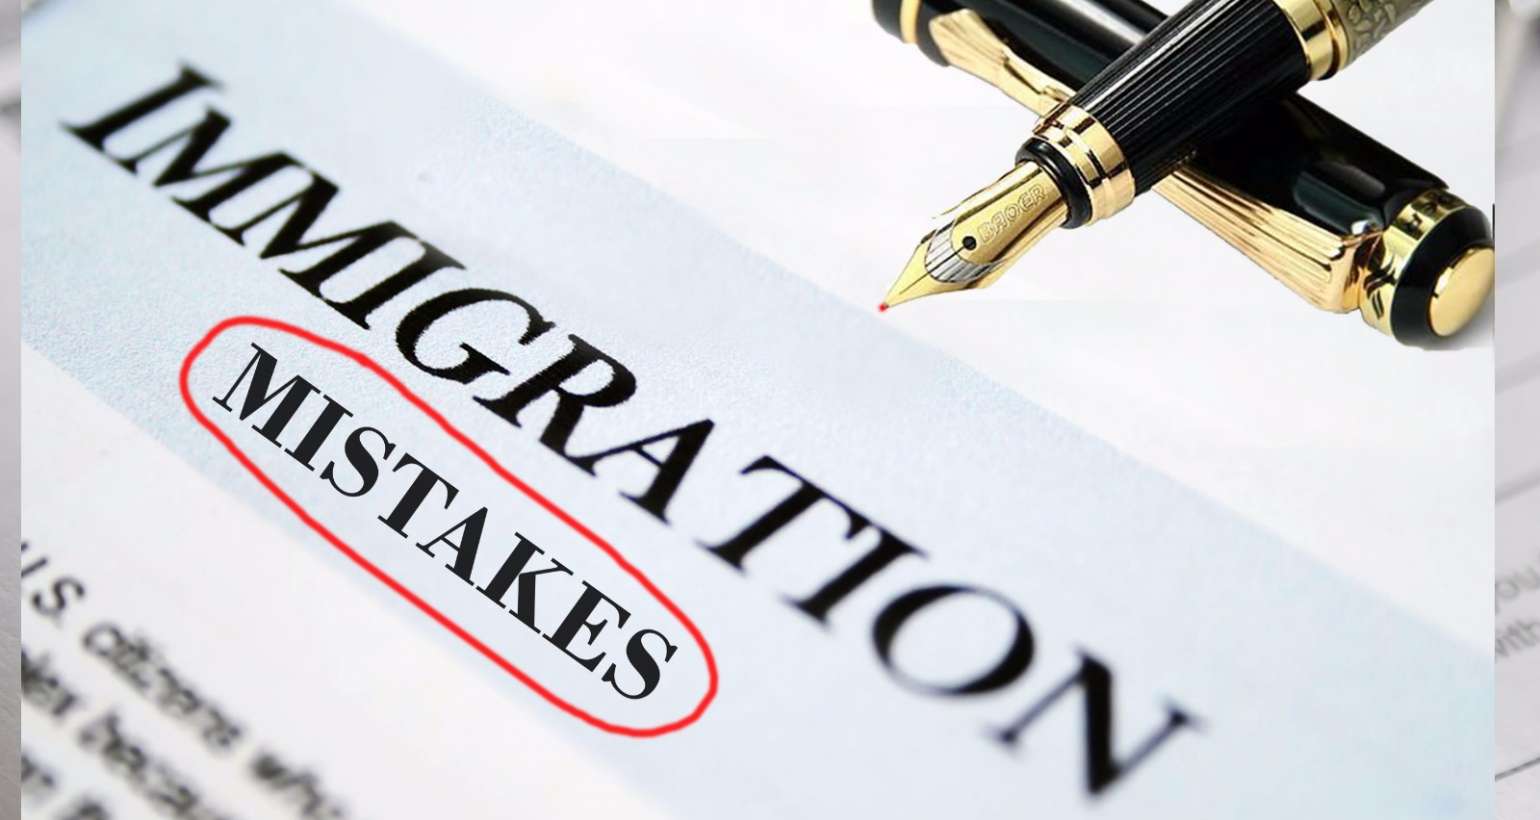 Some mistakes can get your visa denied, and the applicant should consider to avoid them.